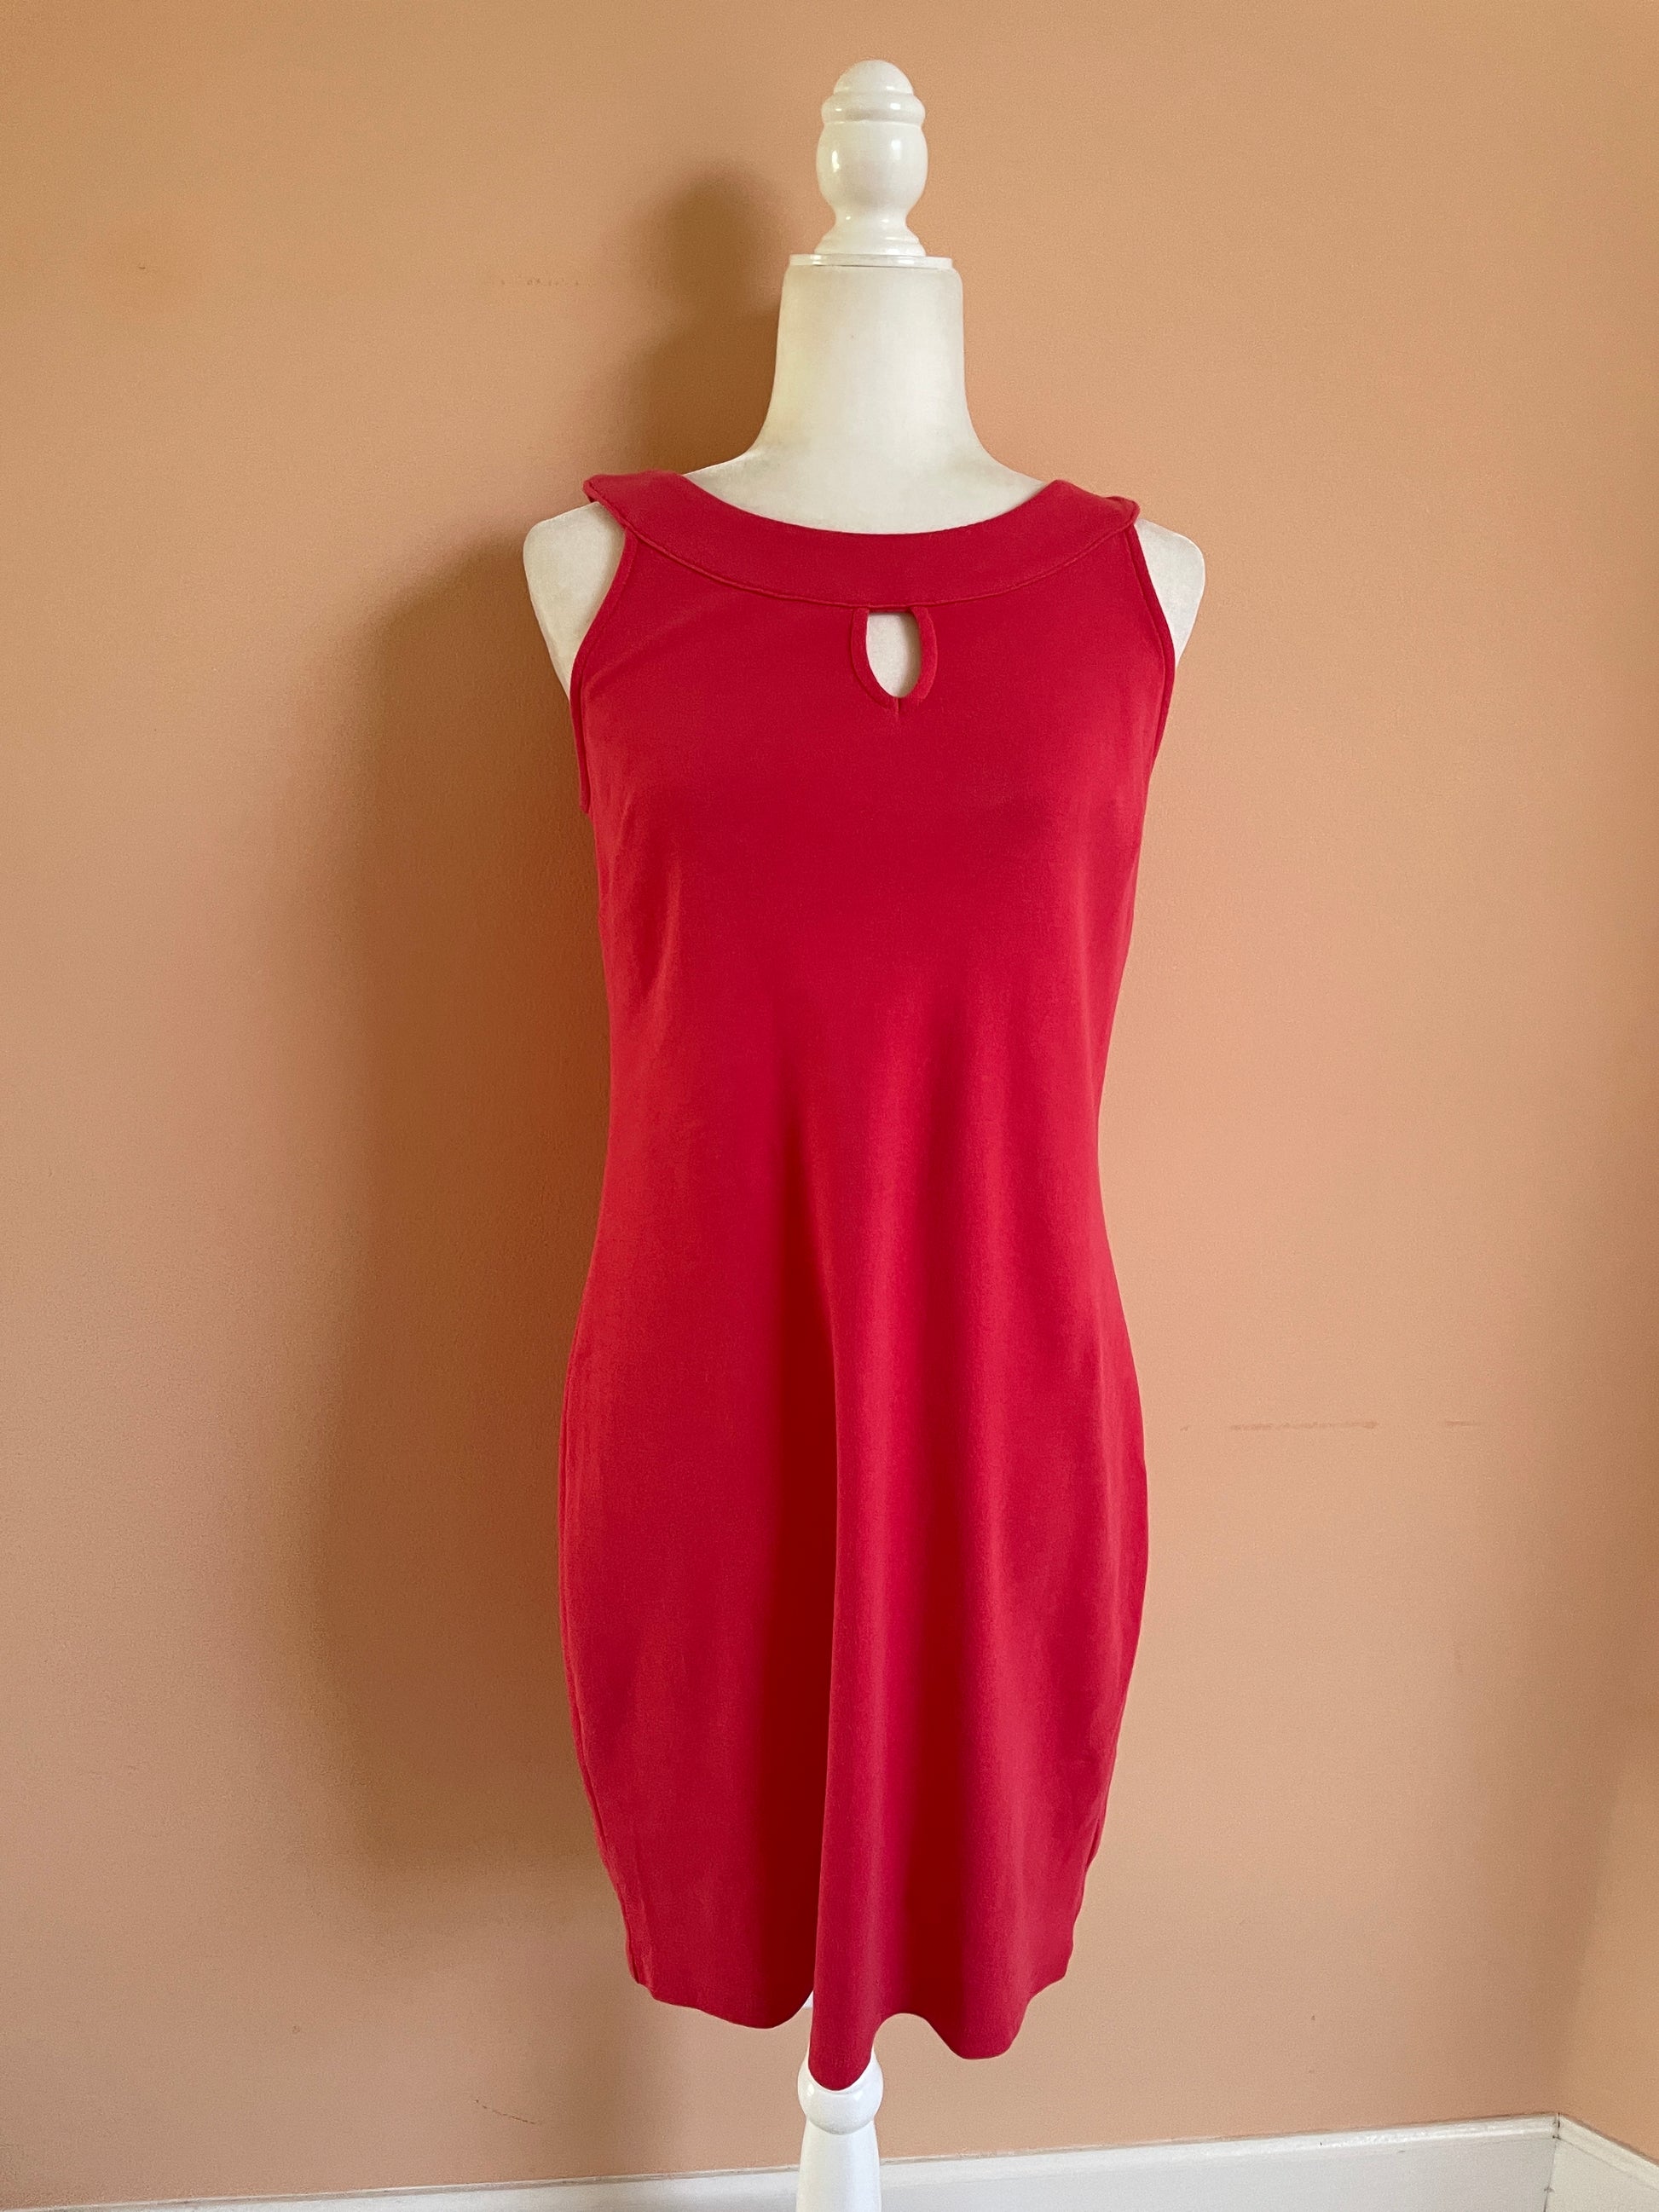 Talbots 1990s ted dress Talbots 90s Sleeveless Cotton Casual Red Dress SP